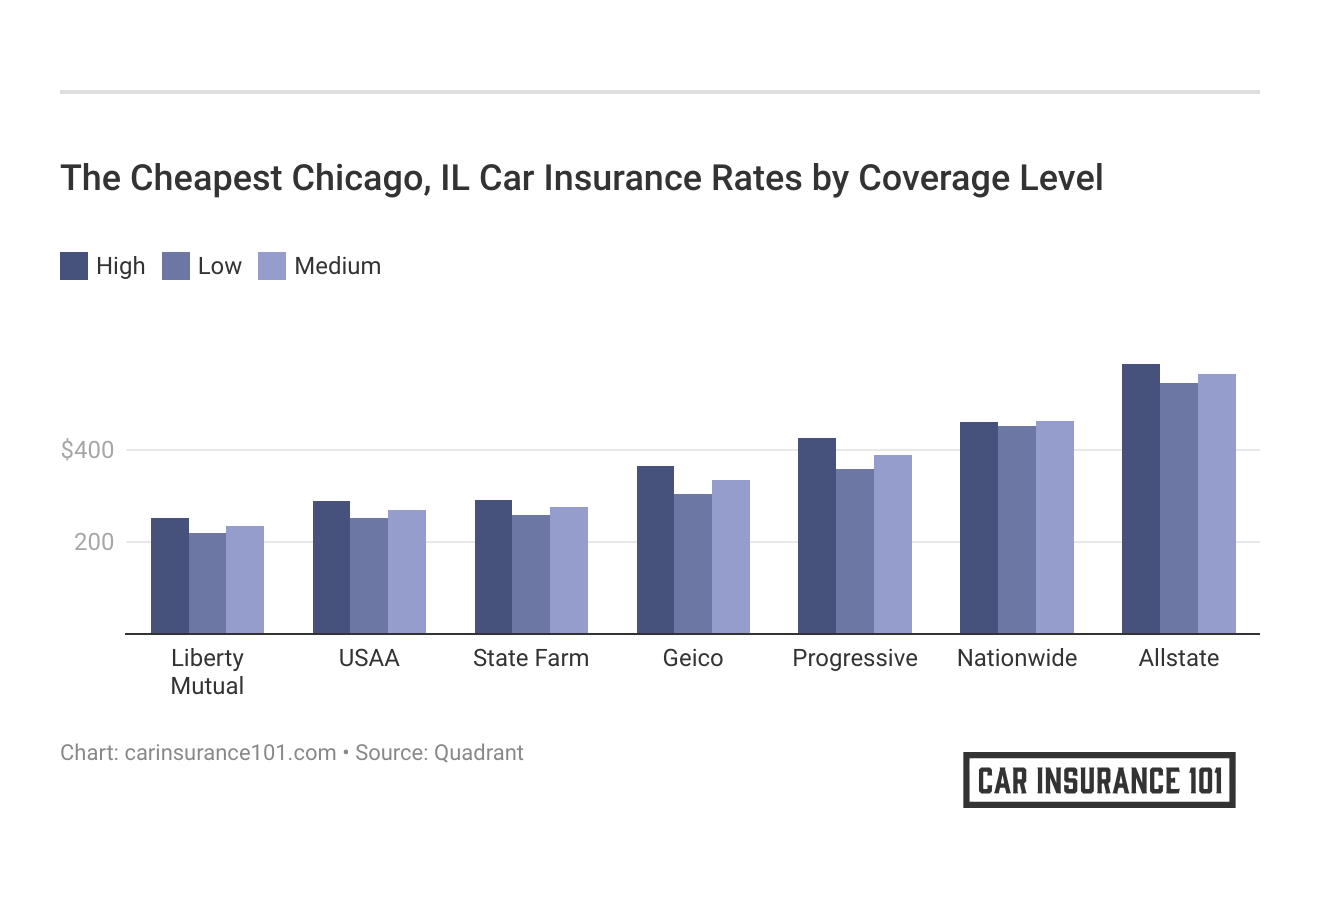 <h3>The Cheapest Chicago, IL Car Insurance Rates by Coverage Level</h3>